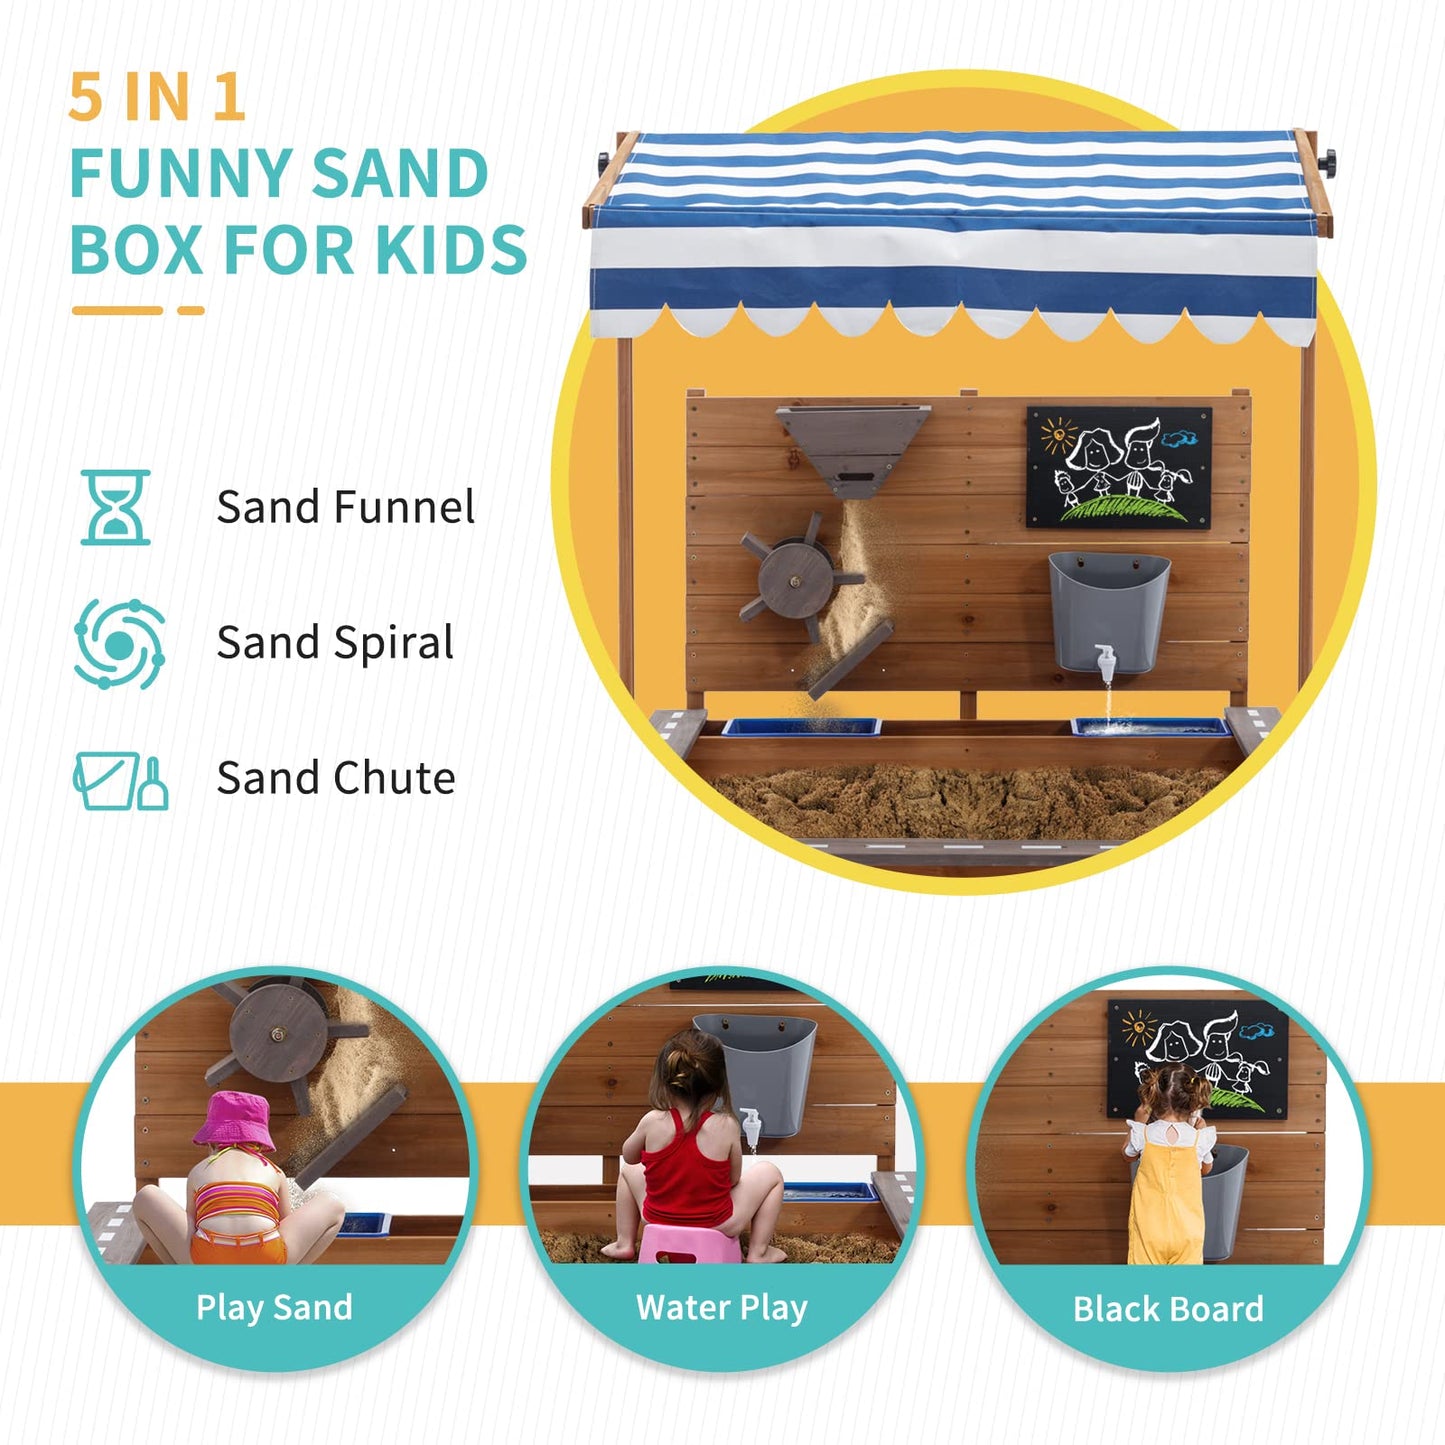 Kids Large Wooden SandBoxes with Roof, Pipleo Outdoor Sand Box Play w/Canopy for Backyard Garden Beach, Sand Pit for Beach Patio Outdoor, [Adjustable Cover & Sand Funnel & Drawing Board] - Brown Oak